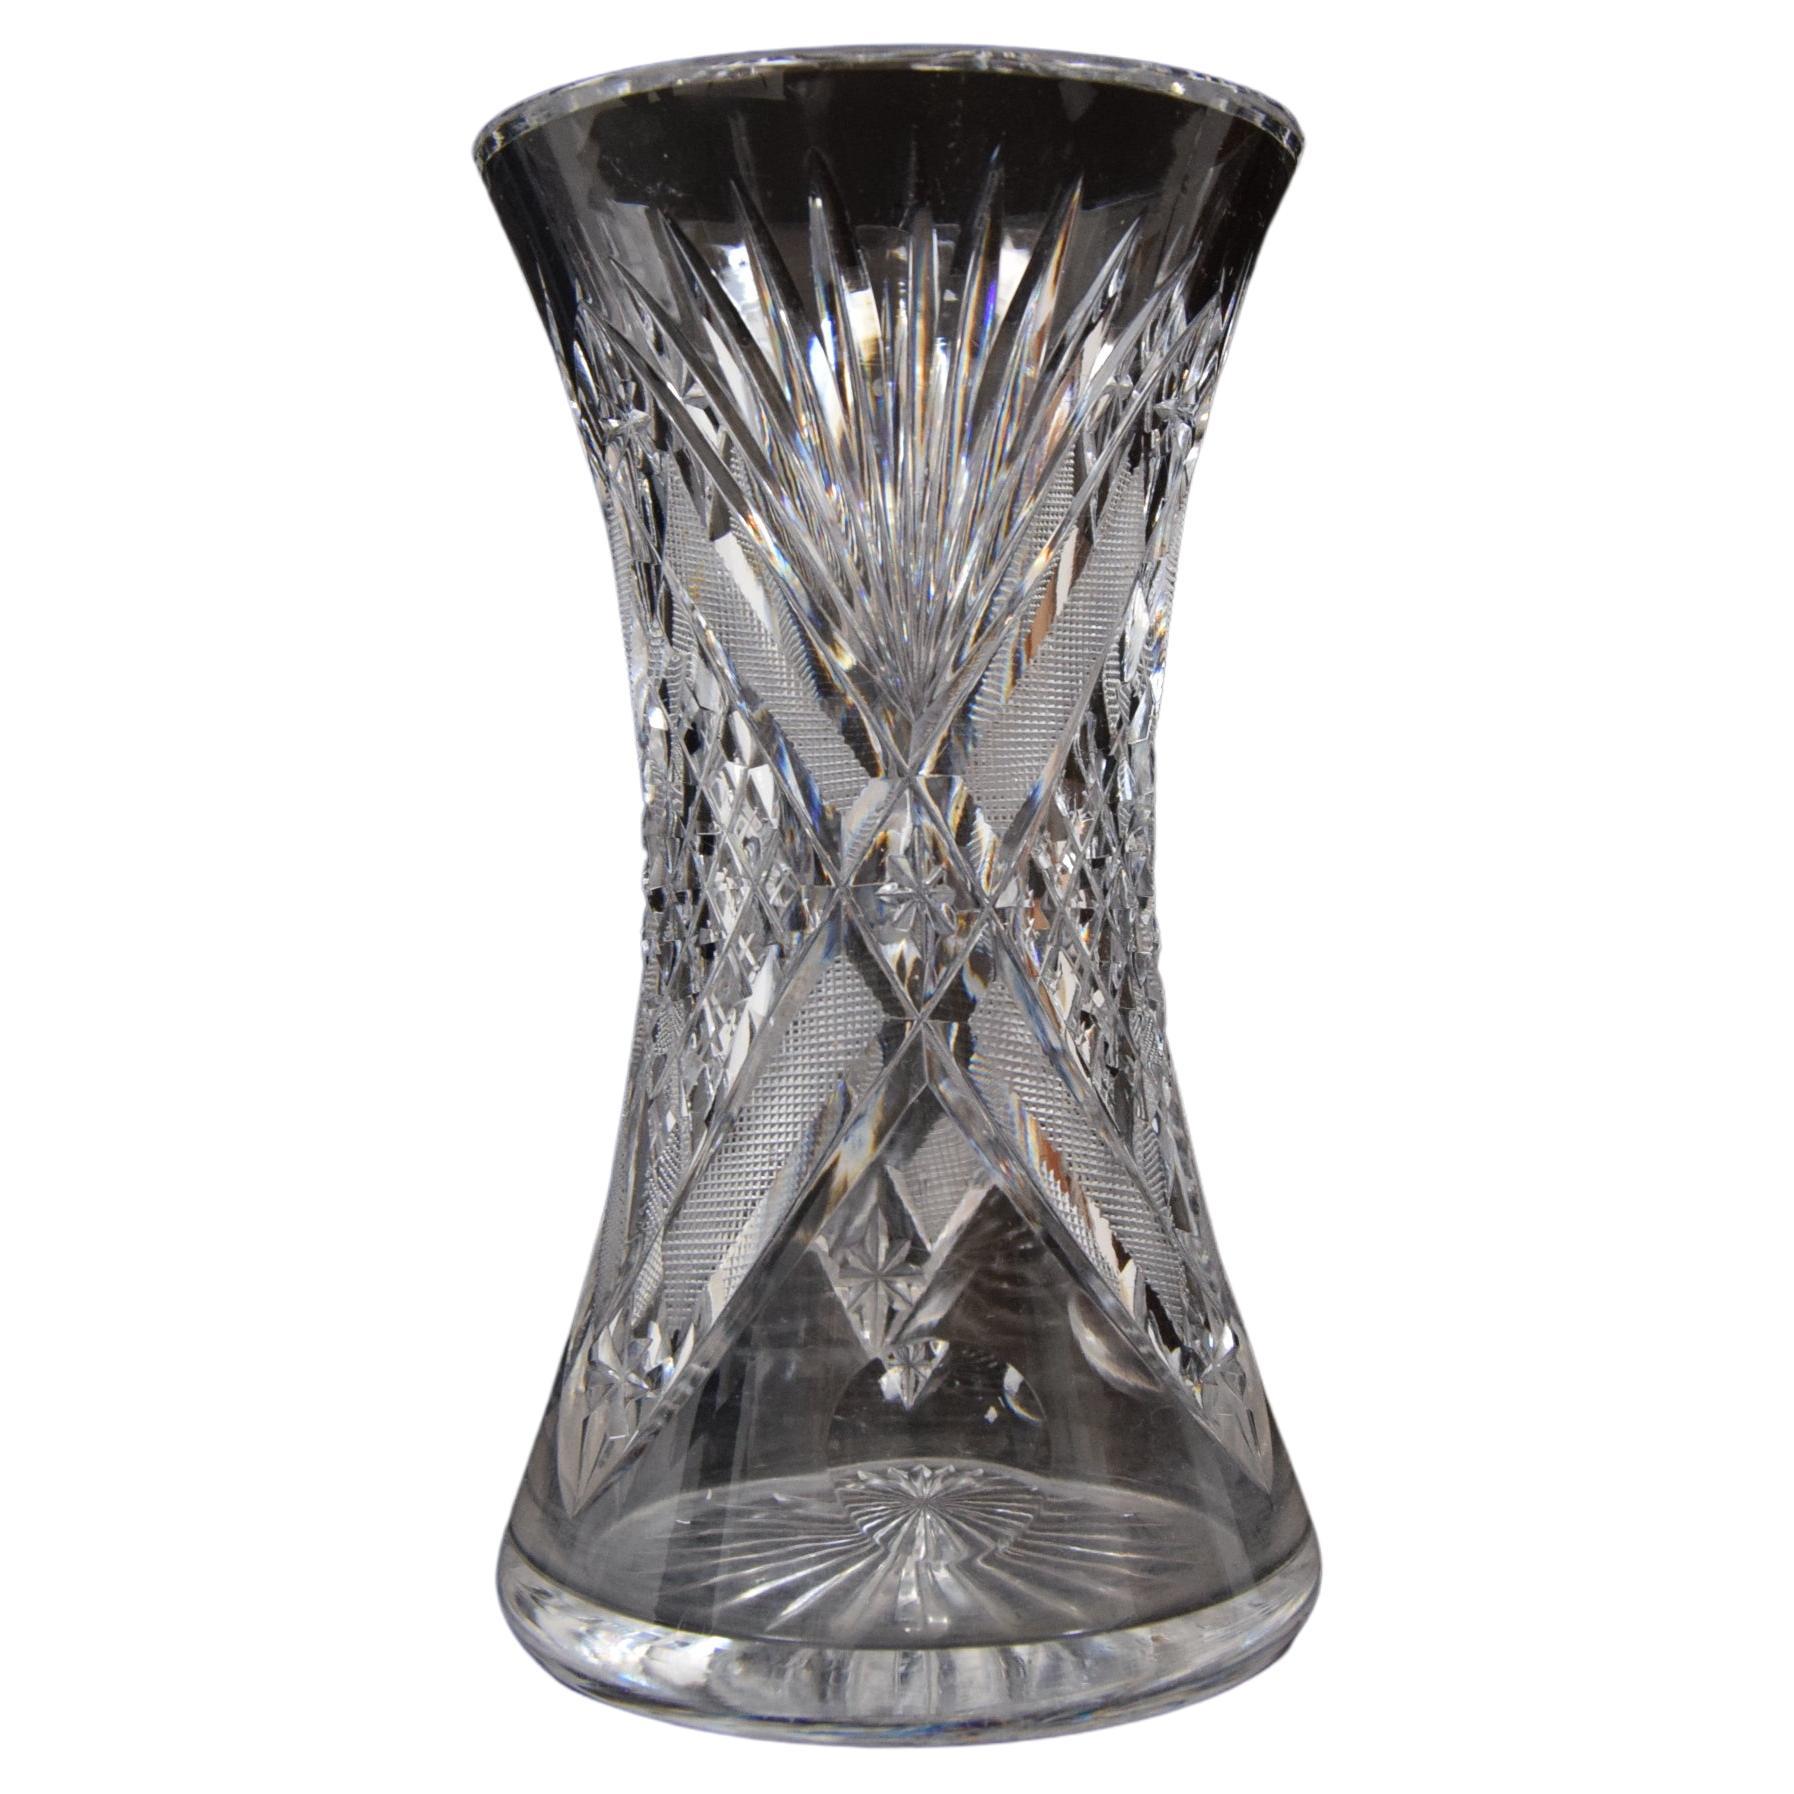 Rare Vintage Vase, Cut Crystal Glass, Bohemia in the, 1960s For Sale